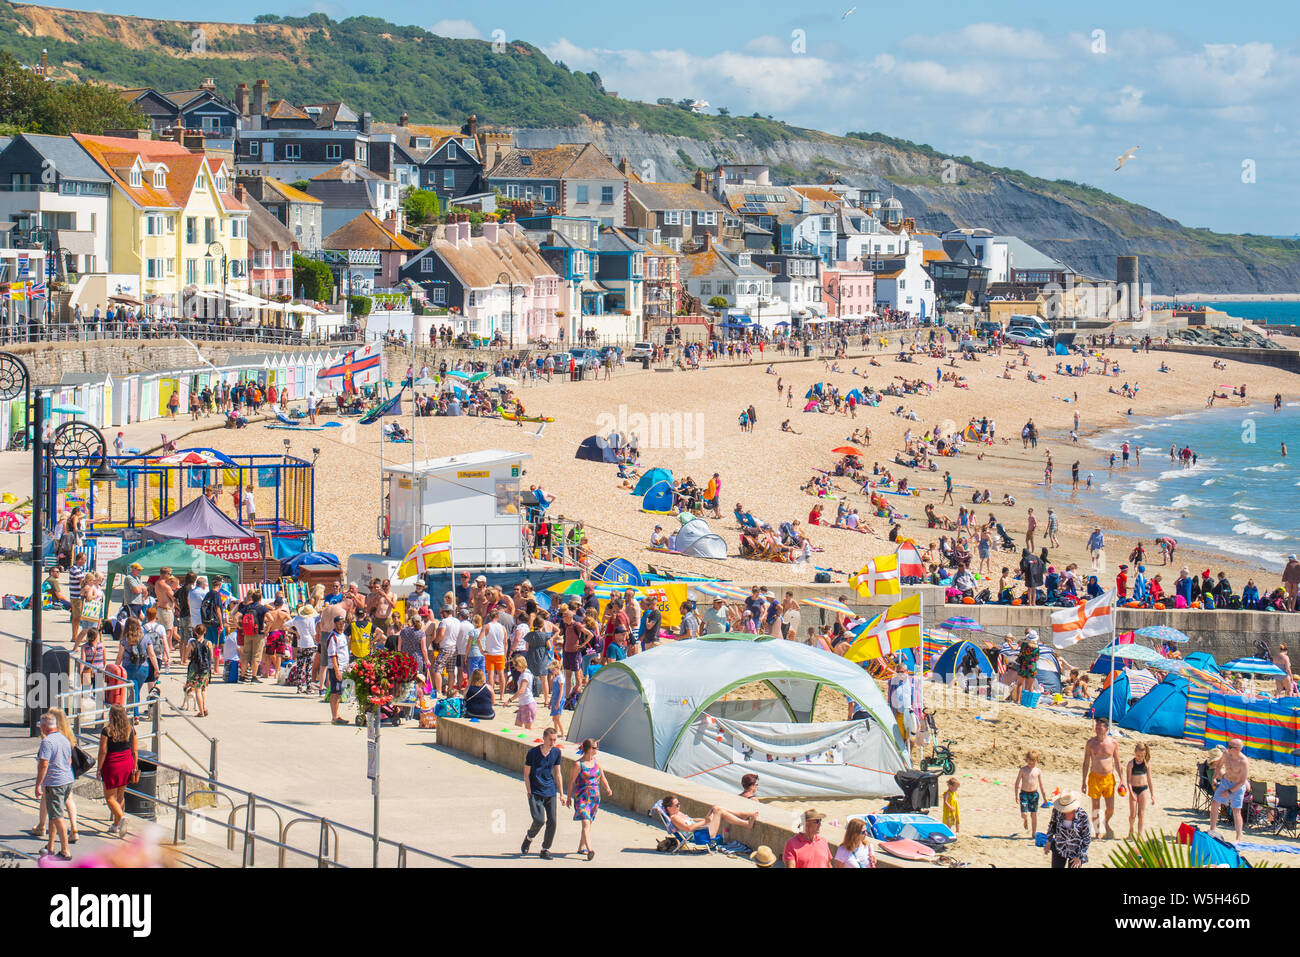 Lyme Regis, Dorset, UK. 29th July 2019. UK Weather: Another scorching hot start to the week at the picturesque seaside resort of Lyme Regis. Crowds of holidaymakers  and families pack out the beach to make the best of the baking hot sunshine over RNLI and Regatta week.  Credit: Celia McMahon/Alamy Live News. Stock Photo